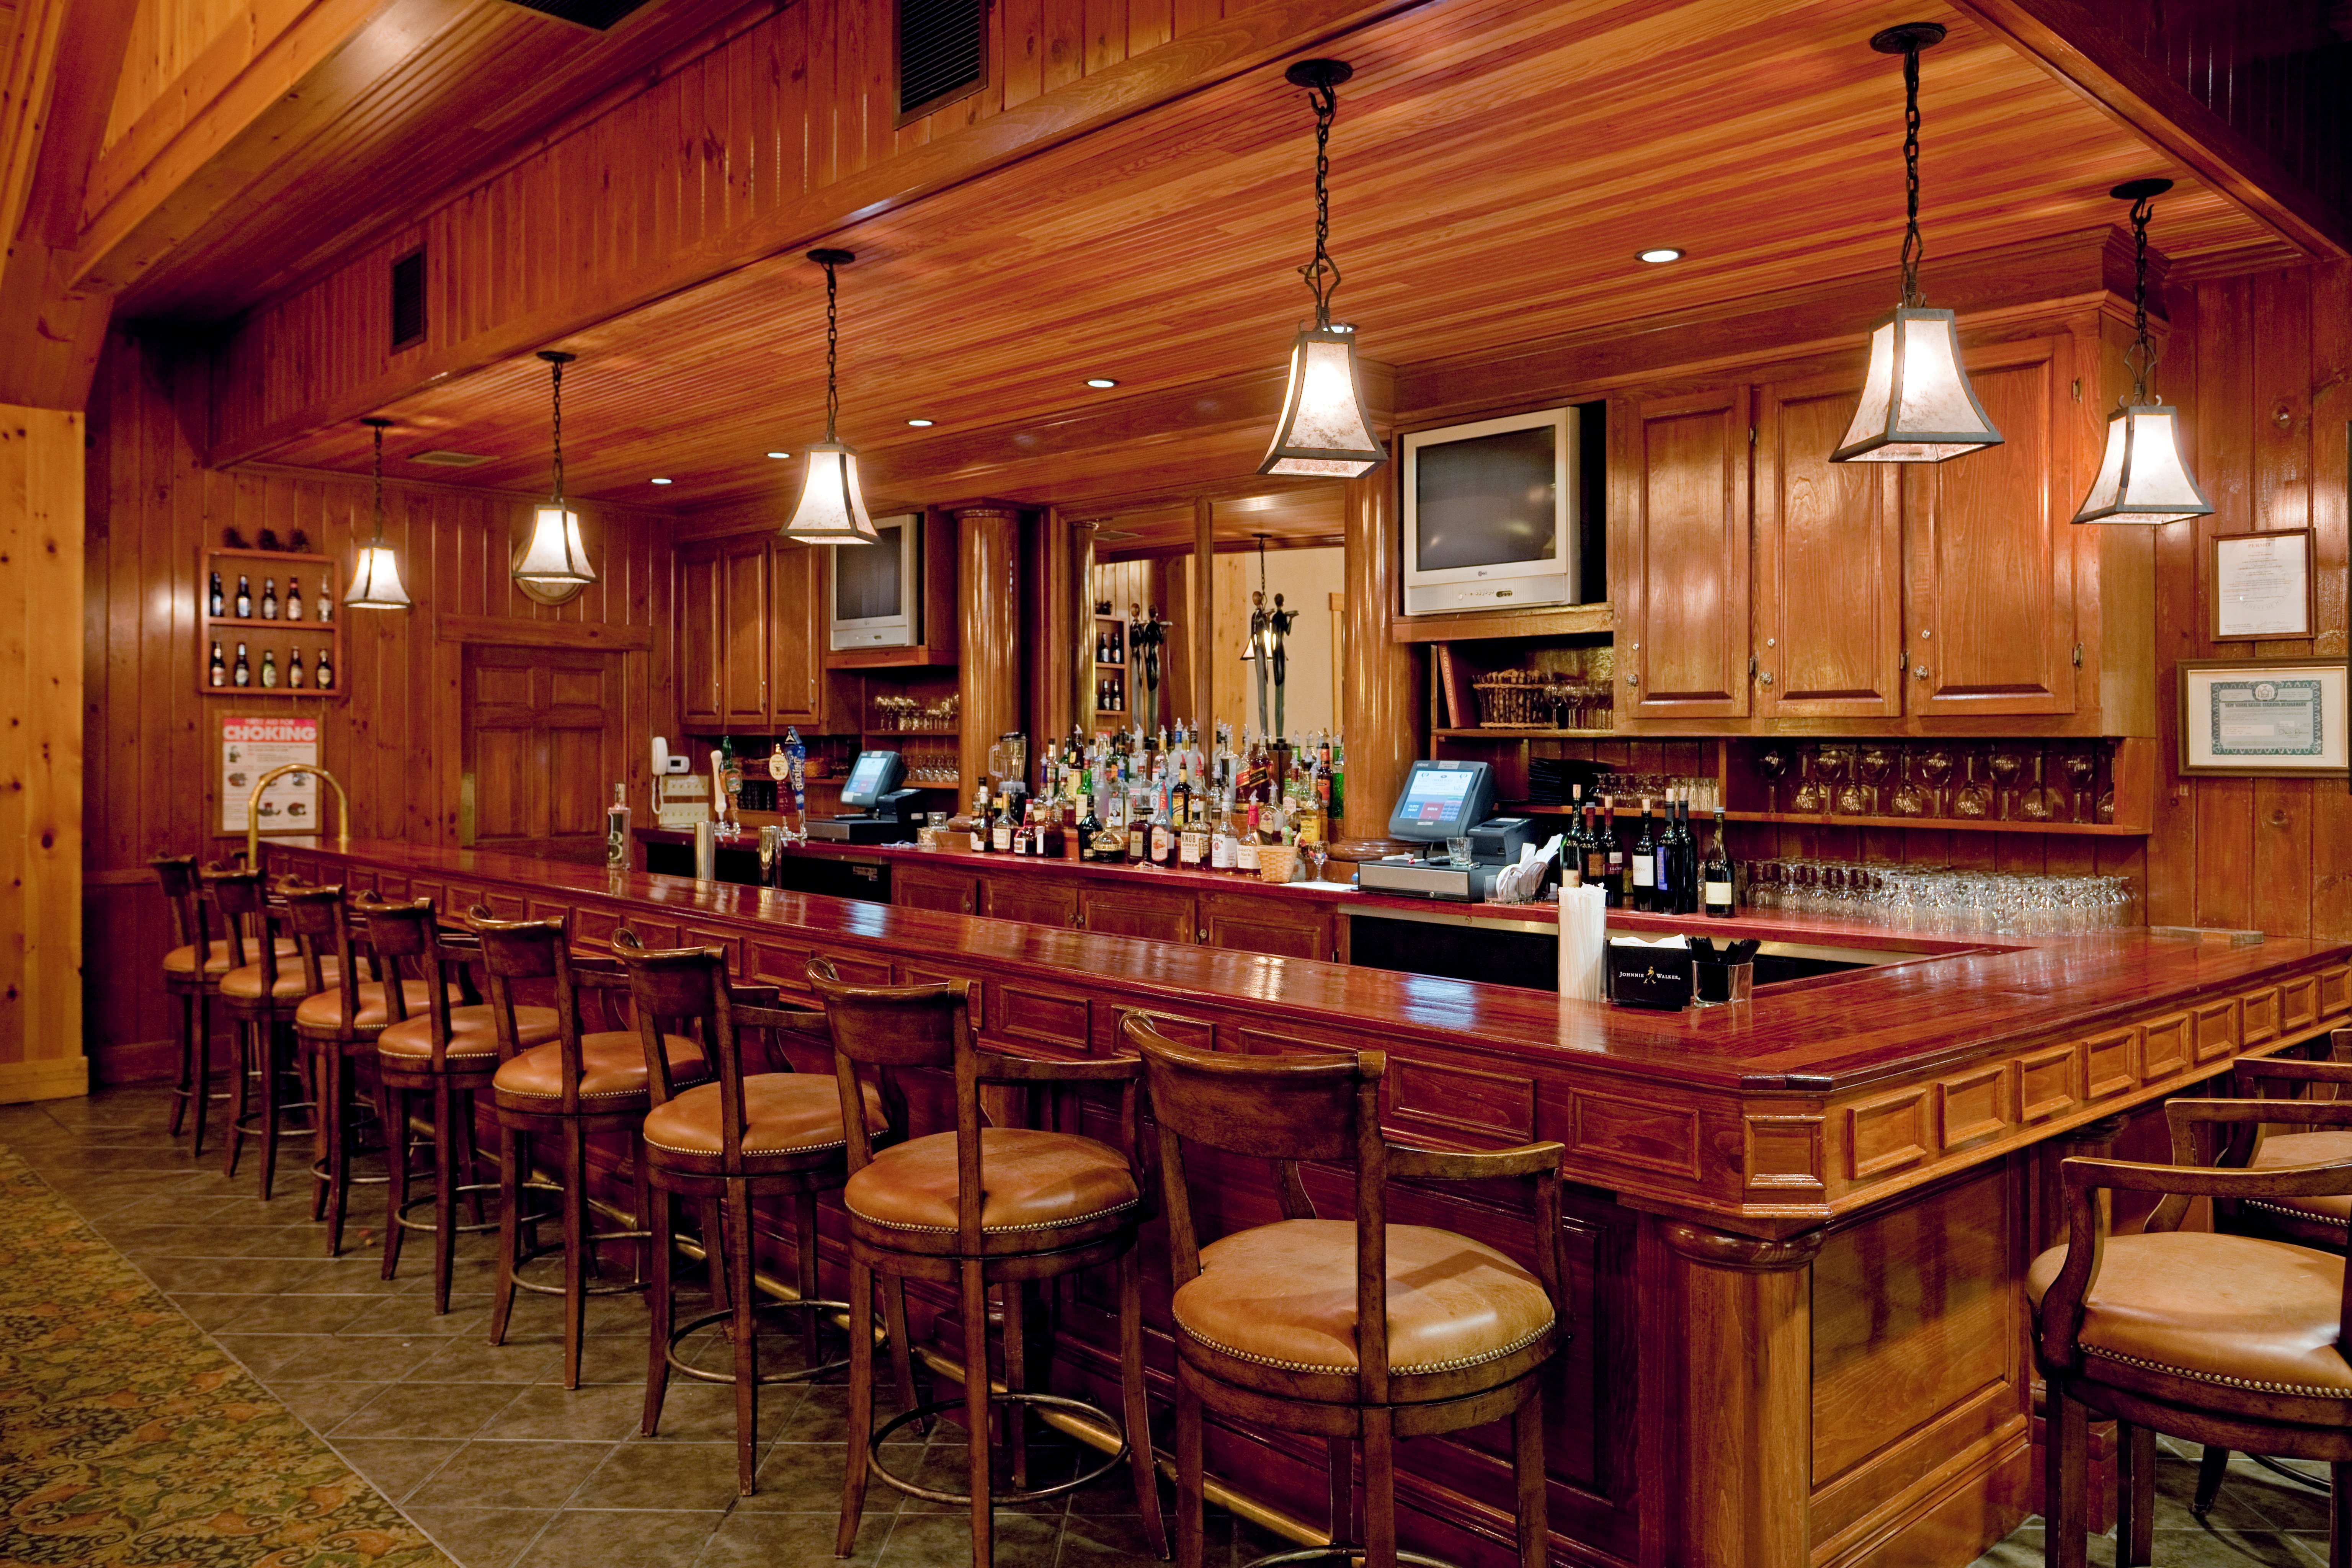 Stop in for a drink at our Great Room Bar